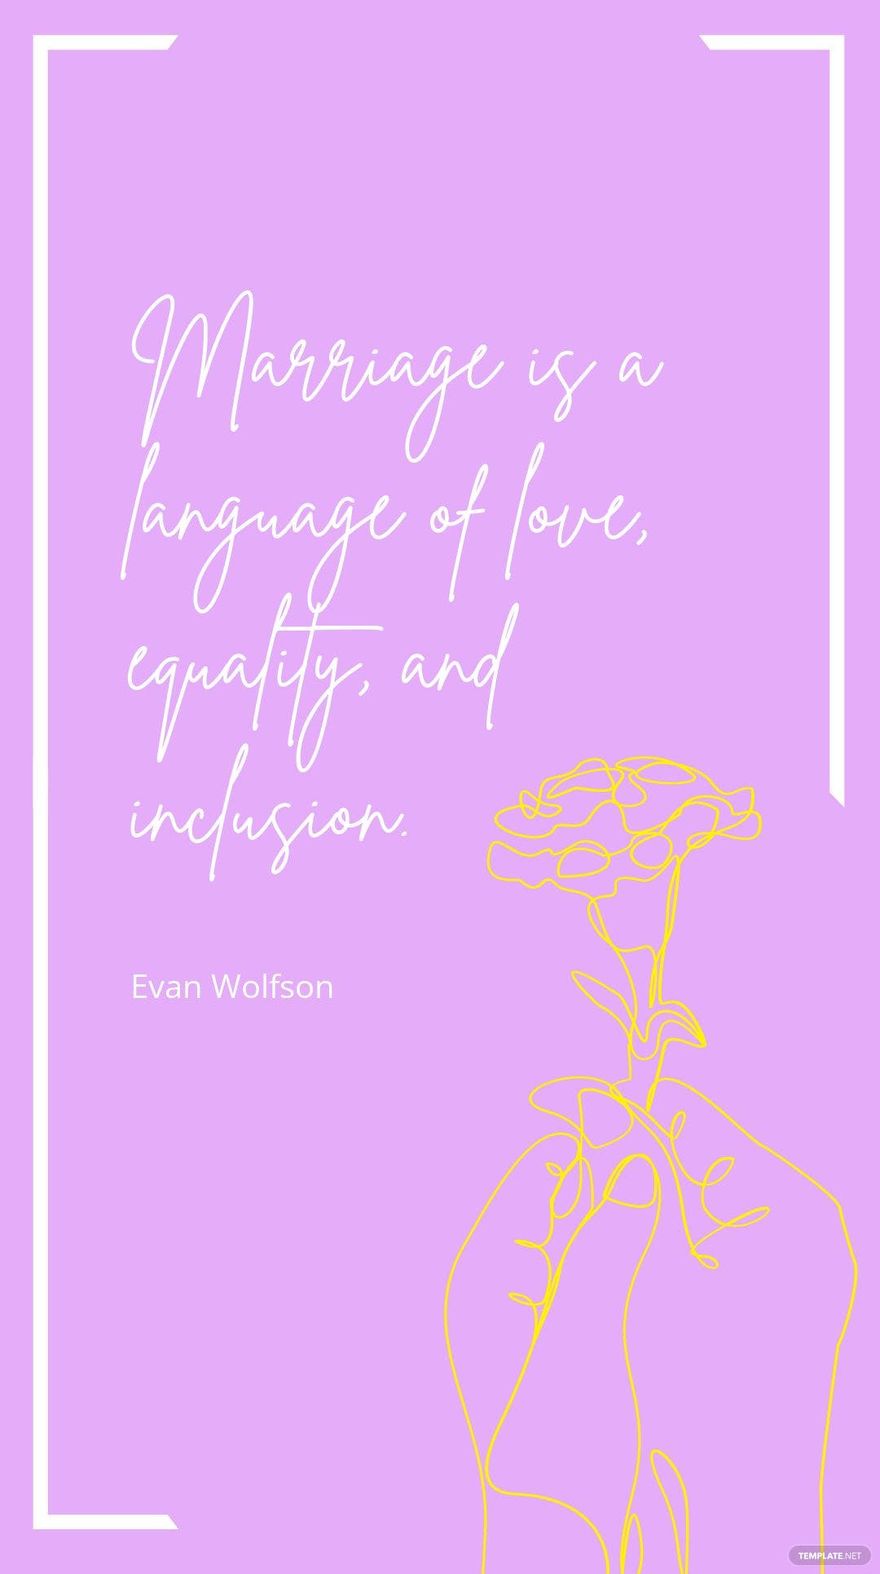 Free Evan Wolfson - Marriage is a language of love, equality, and inclusion. in JPG